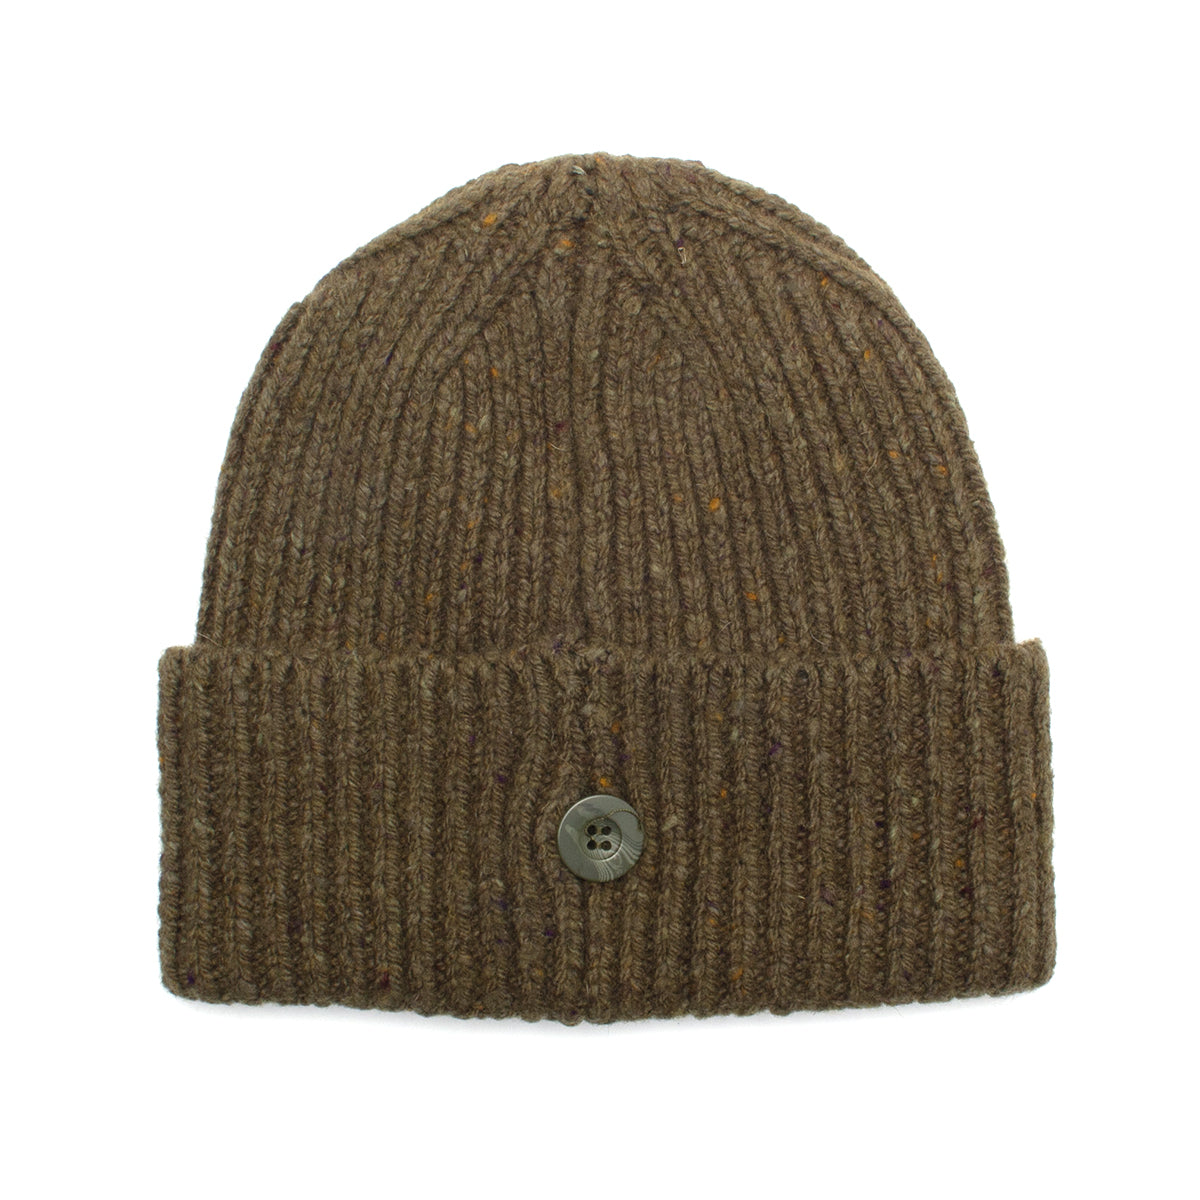 Carhartt WIP | Anglistic Beanie Style # I013193-1T5 Color : Speckled Highland